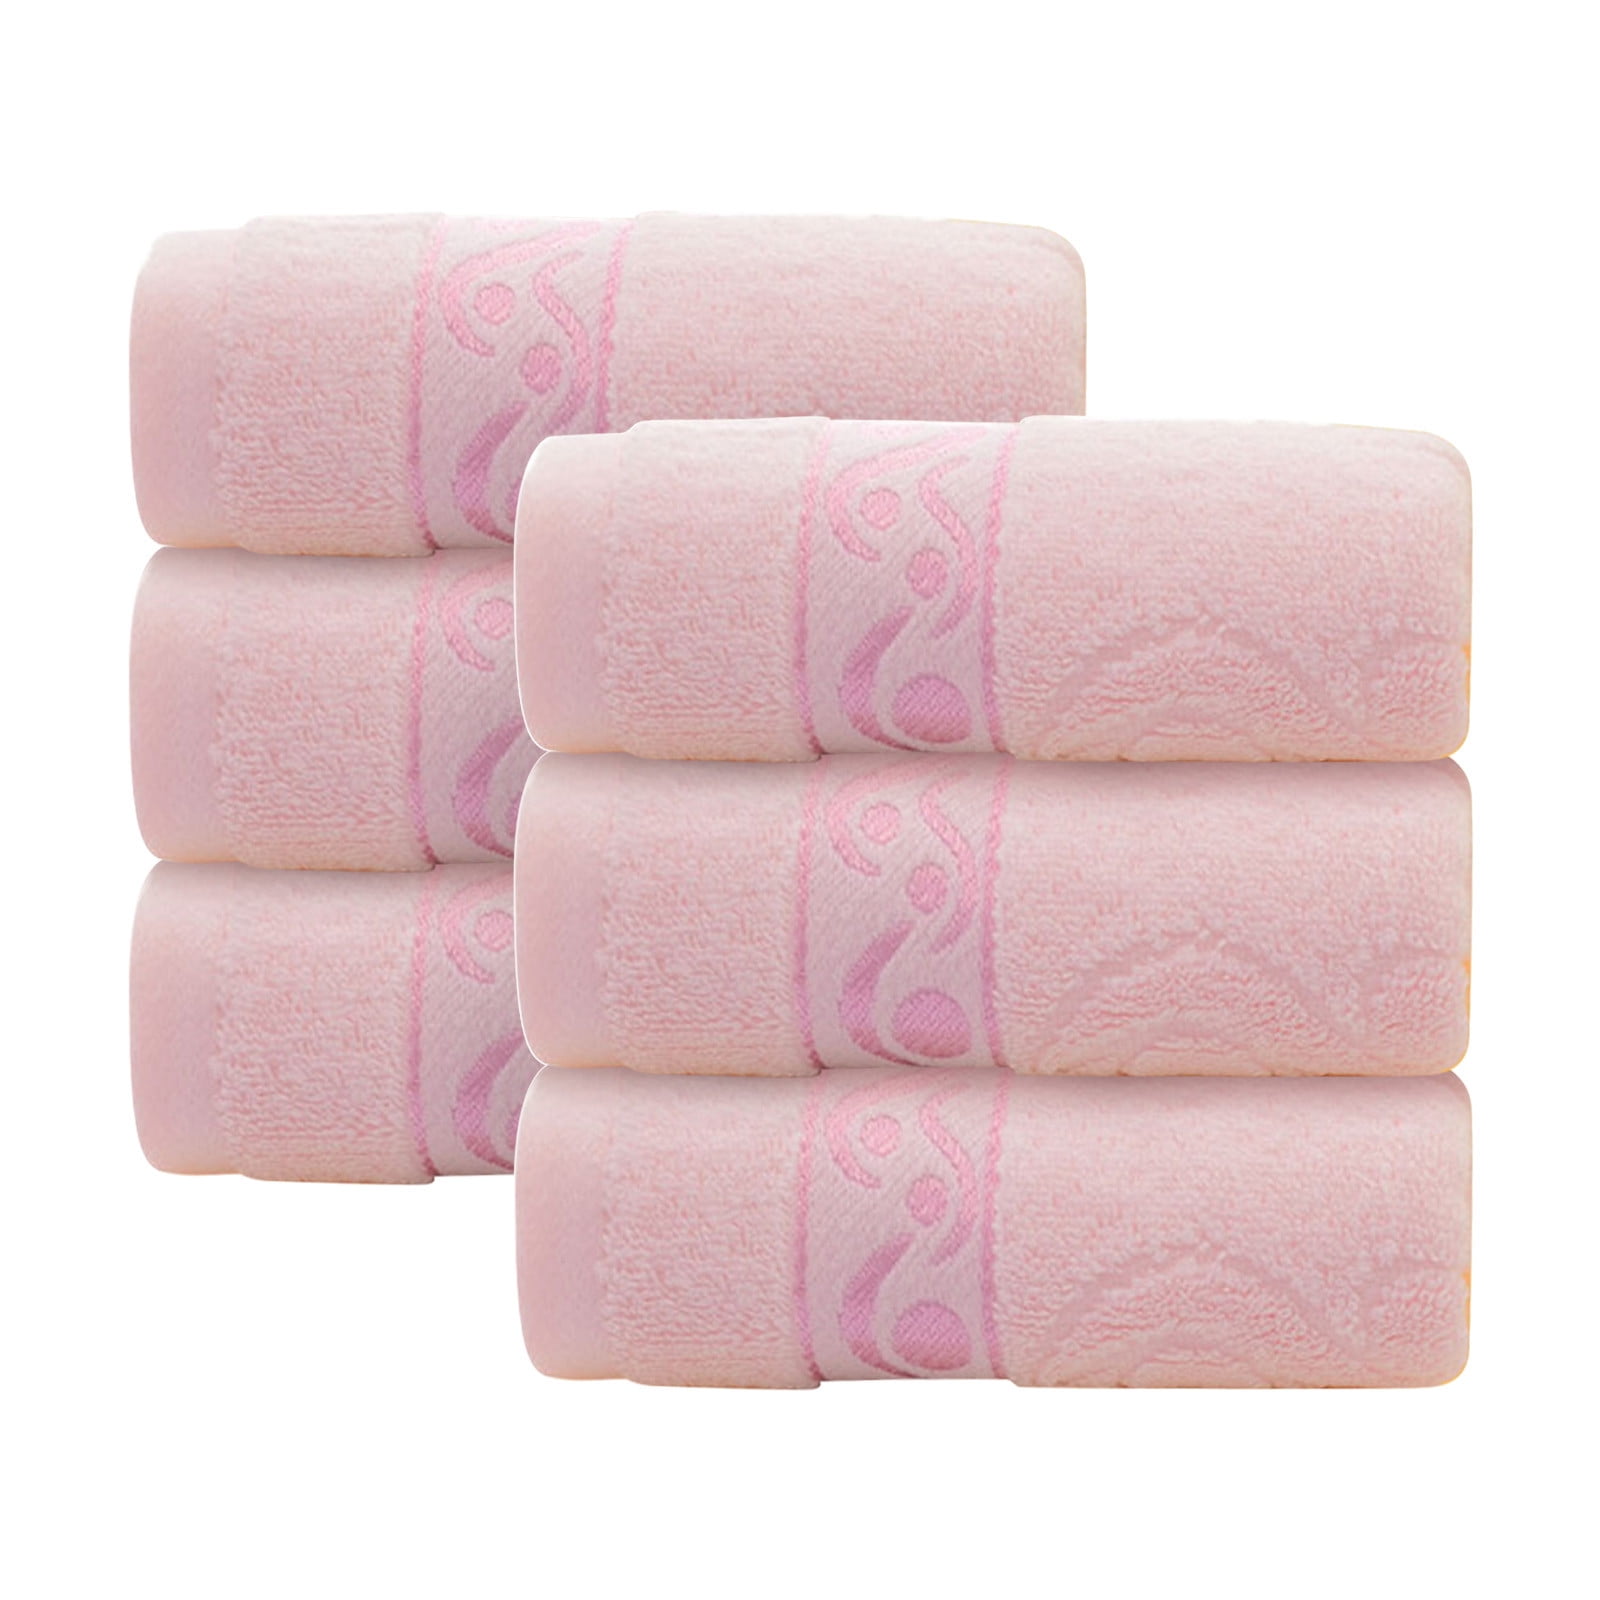  Bamboo Cotton Super Soft Highly Absorbent 2 Pieces Pink Towel  Set for Bathrome Hand Towel,Salon Towels : Home & Kitchen